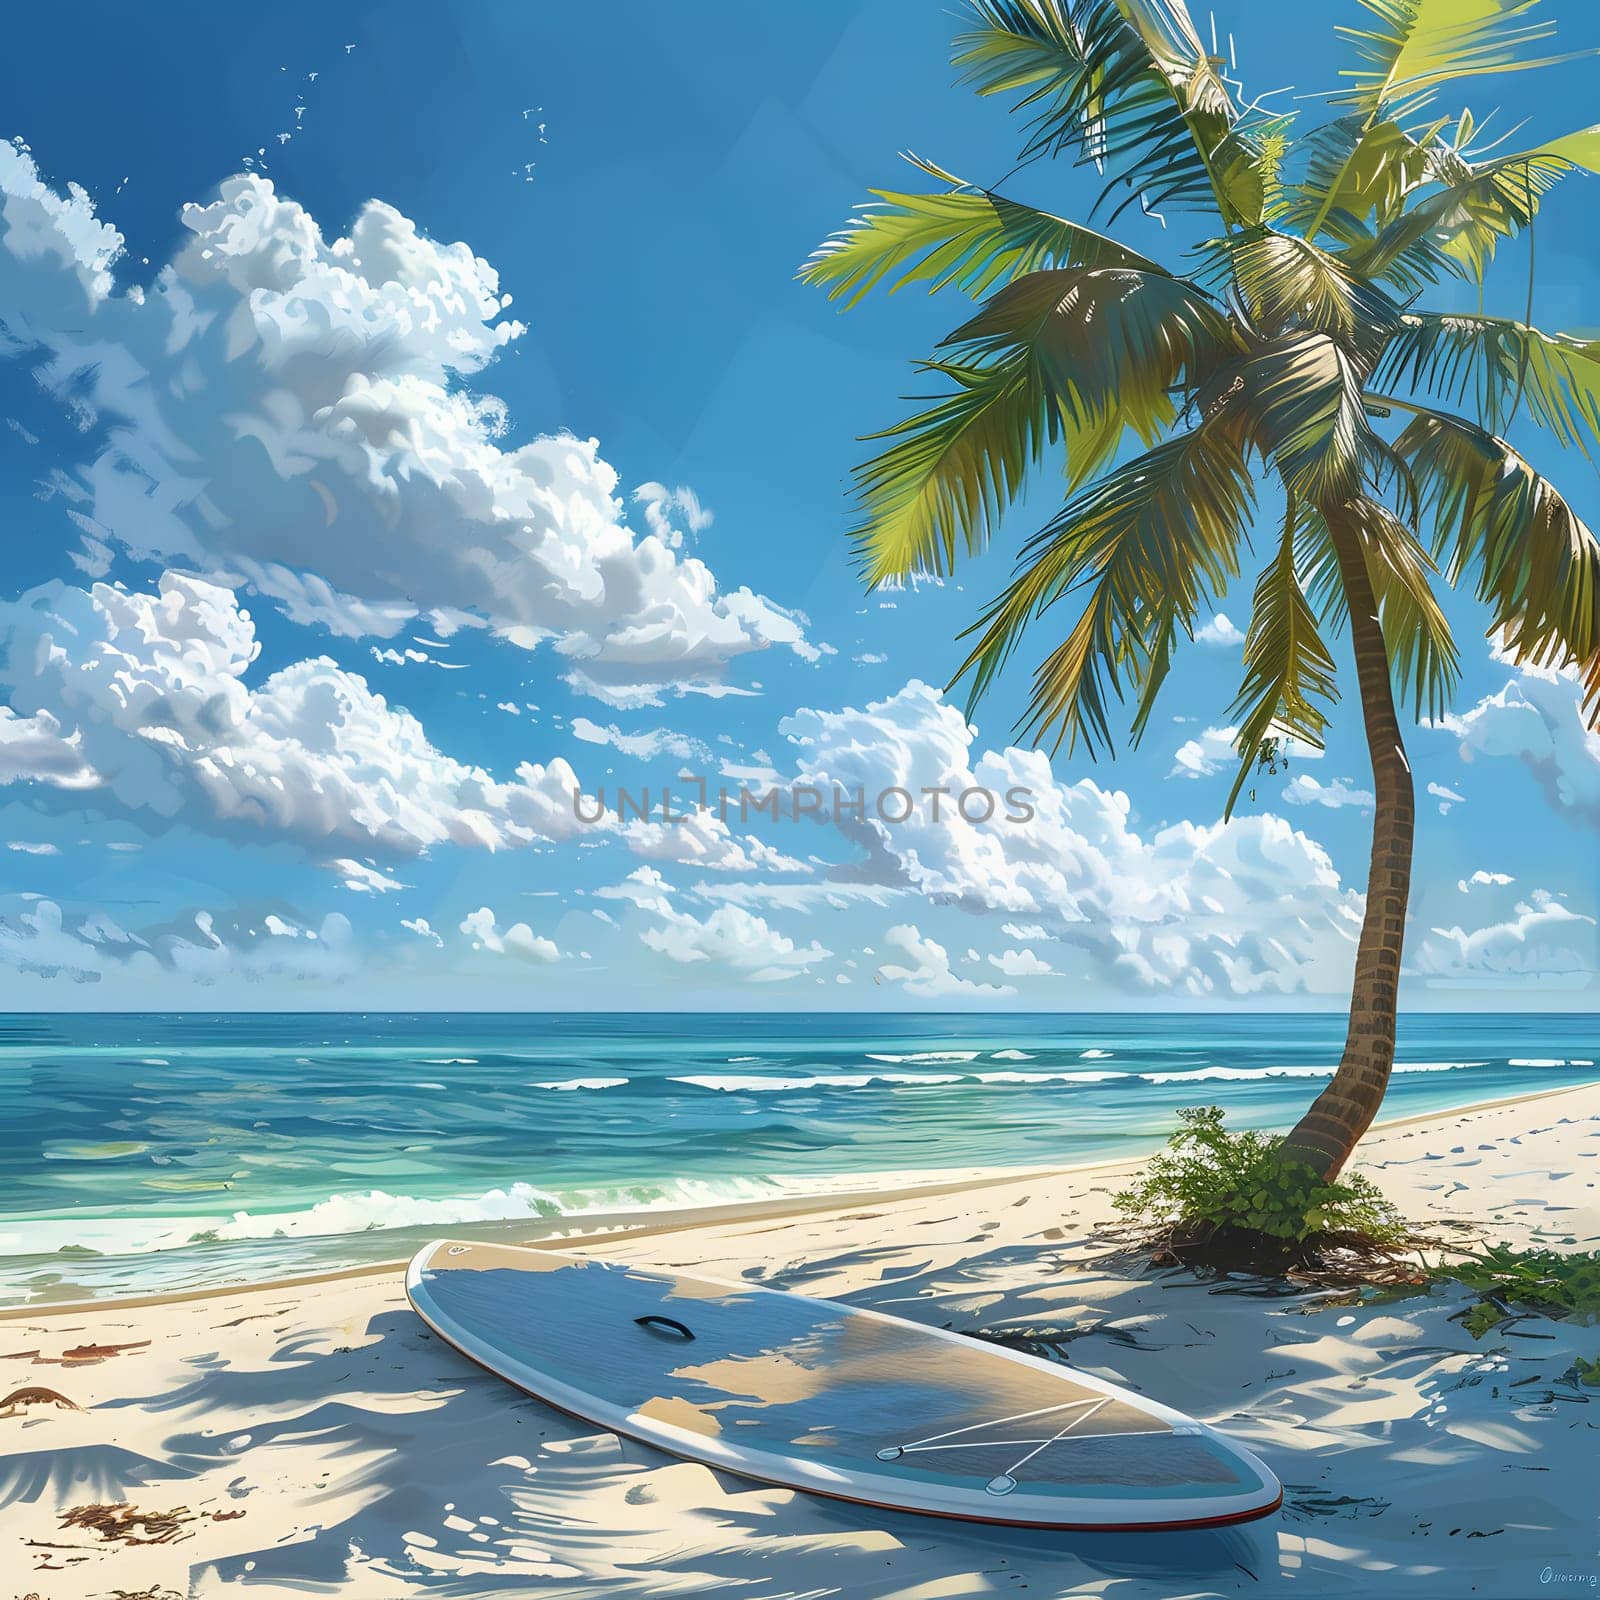 A surfboard rests on the sandy beach beneath a towering palm tree, with the azure sky and fluffy clouds reflecting in the calm waters of the ocean